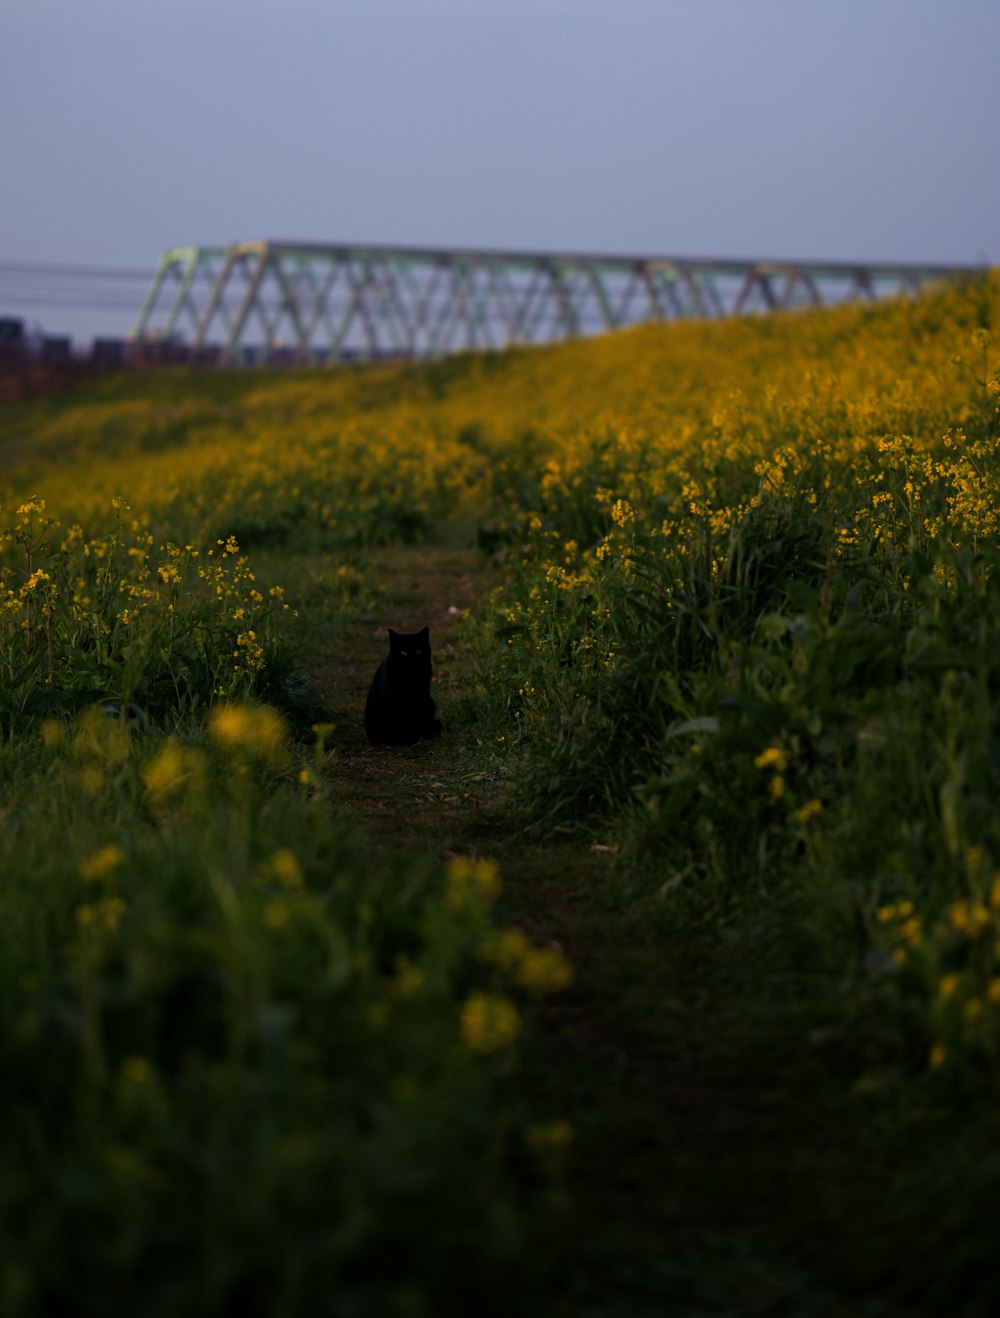 a black cat sitting in the middle of a field